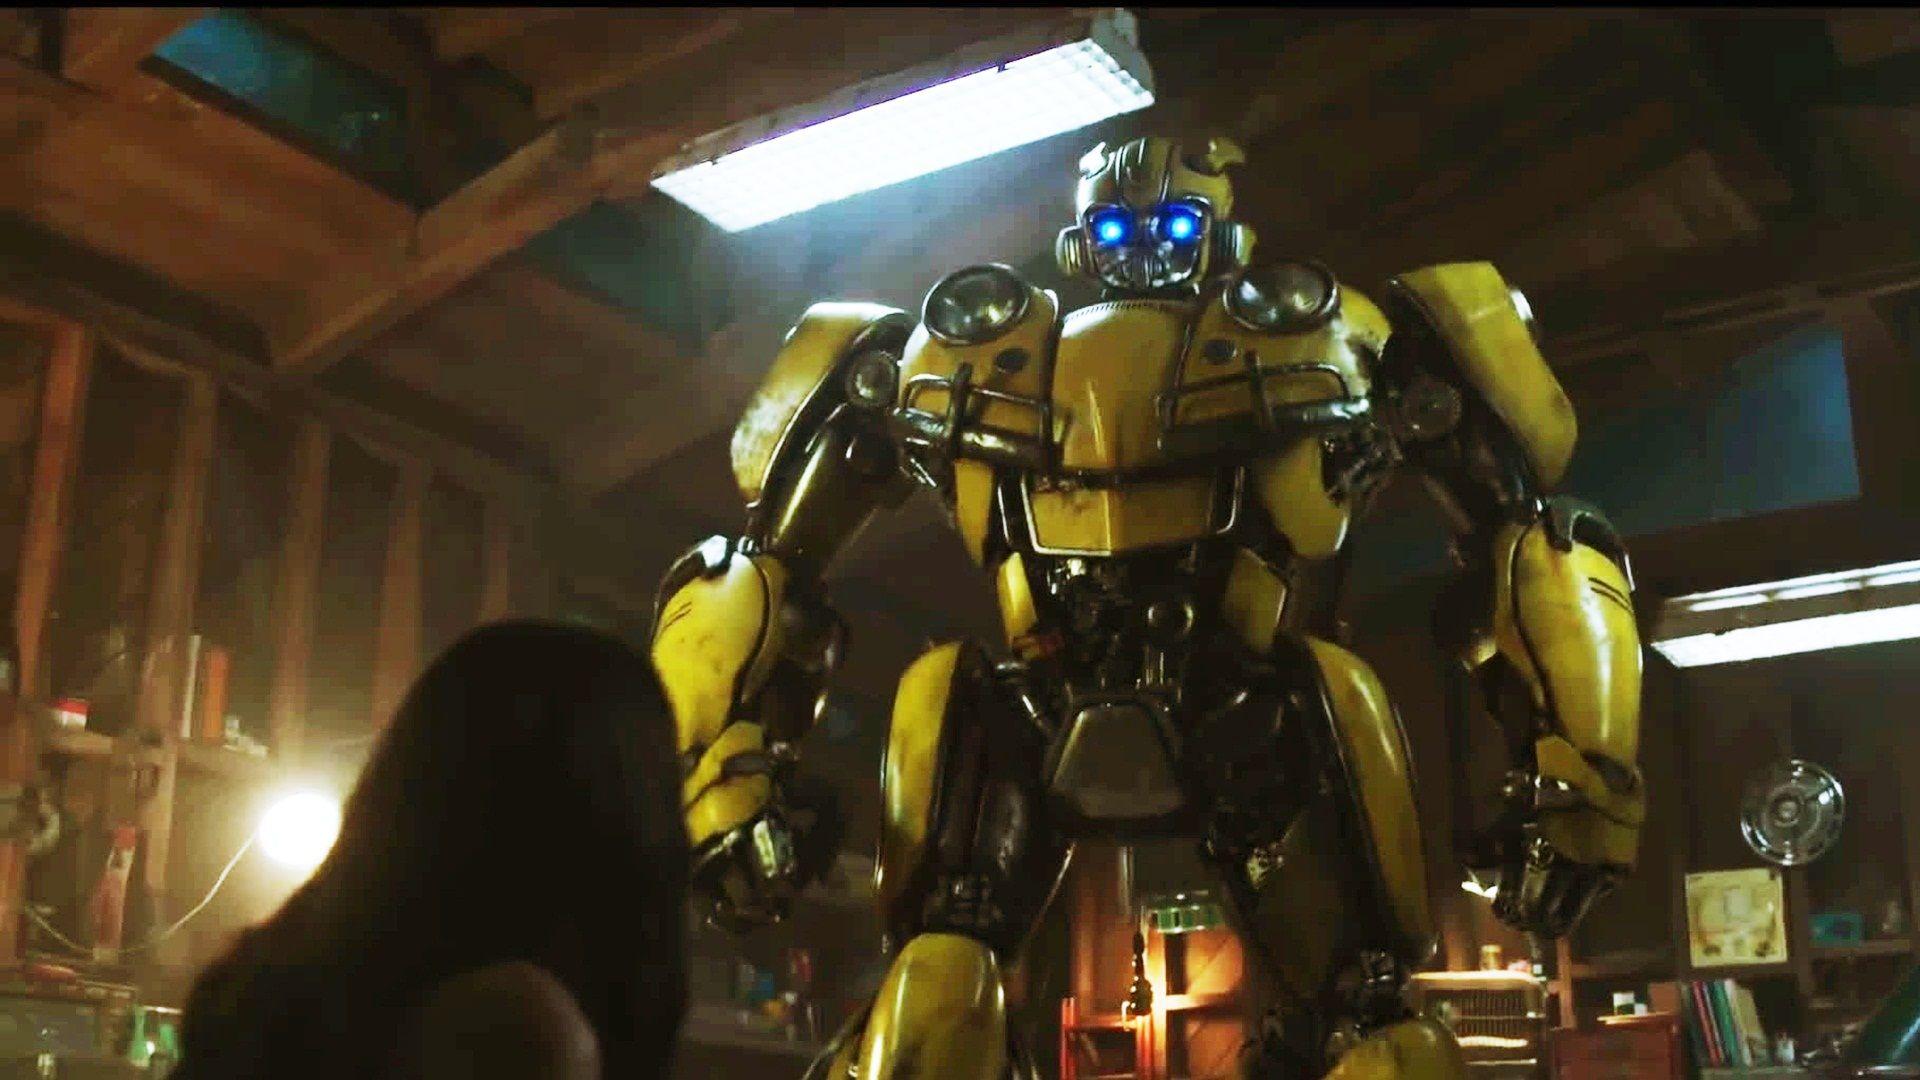 Bumblebee 2018 Movie Poster Wallpapers